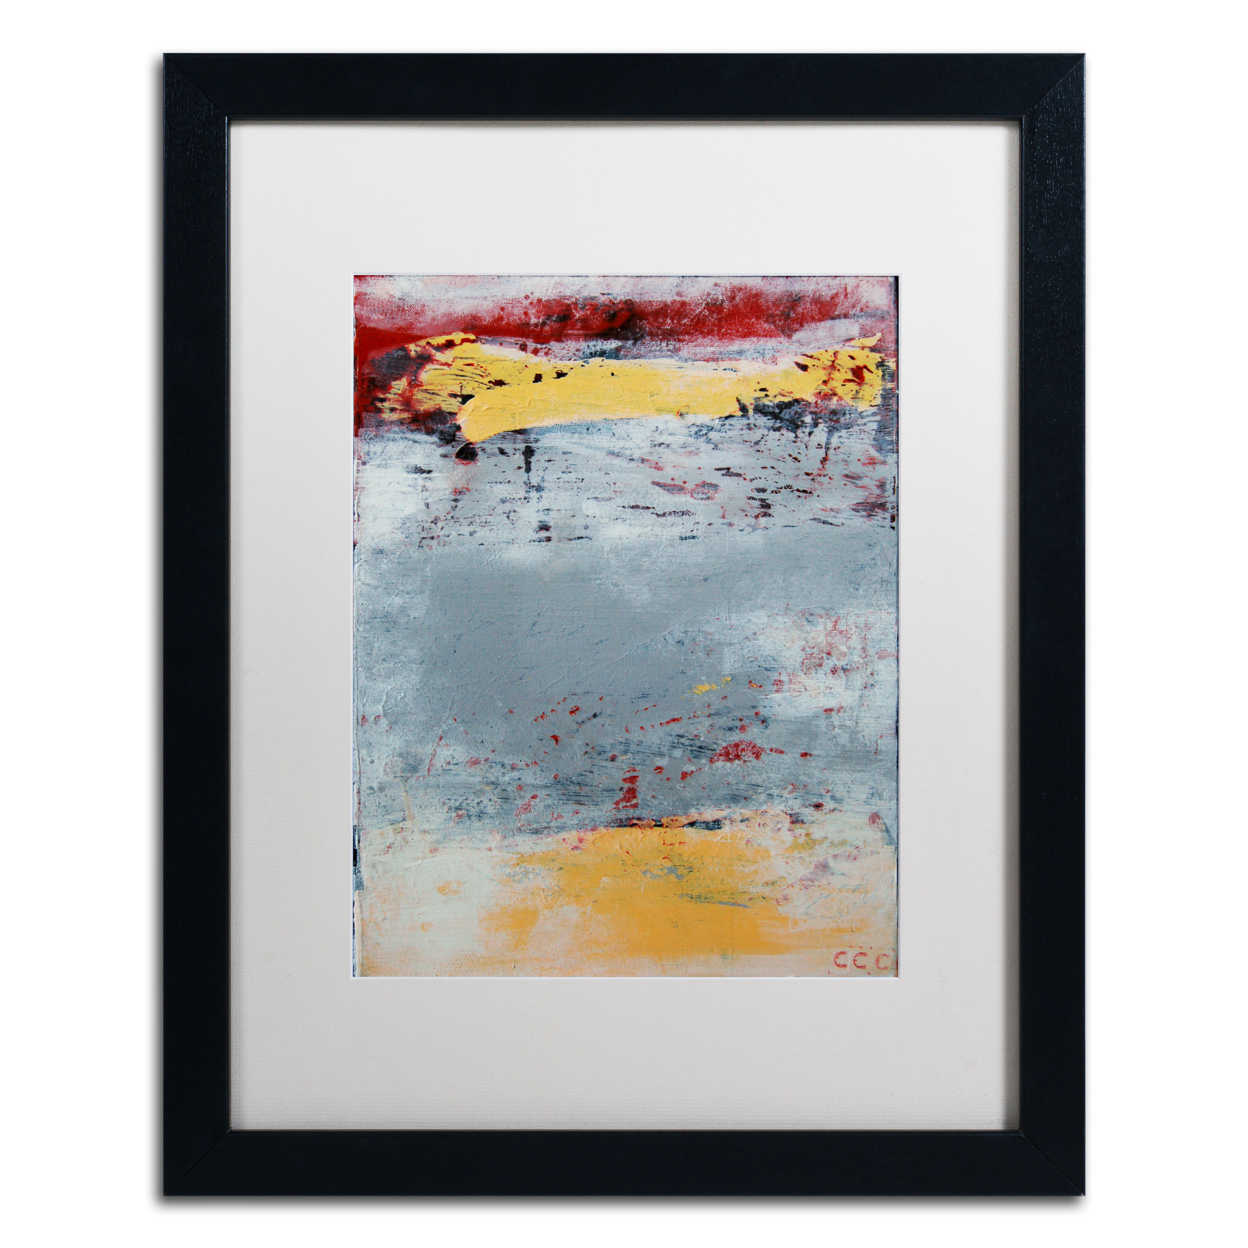 Nicole Dietz 'The Gray Yellow And Red One' Black Wooden Framed Art 18 X 22 Inches